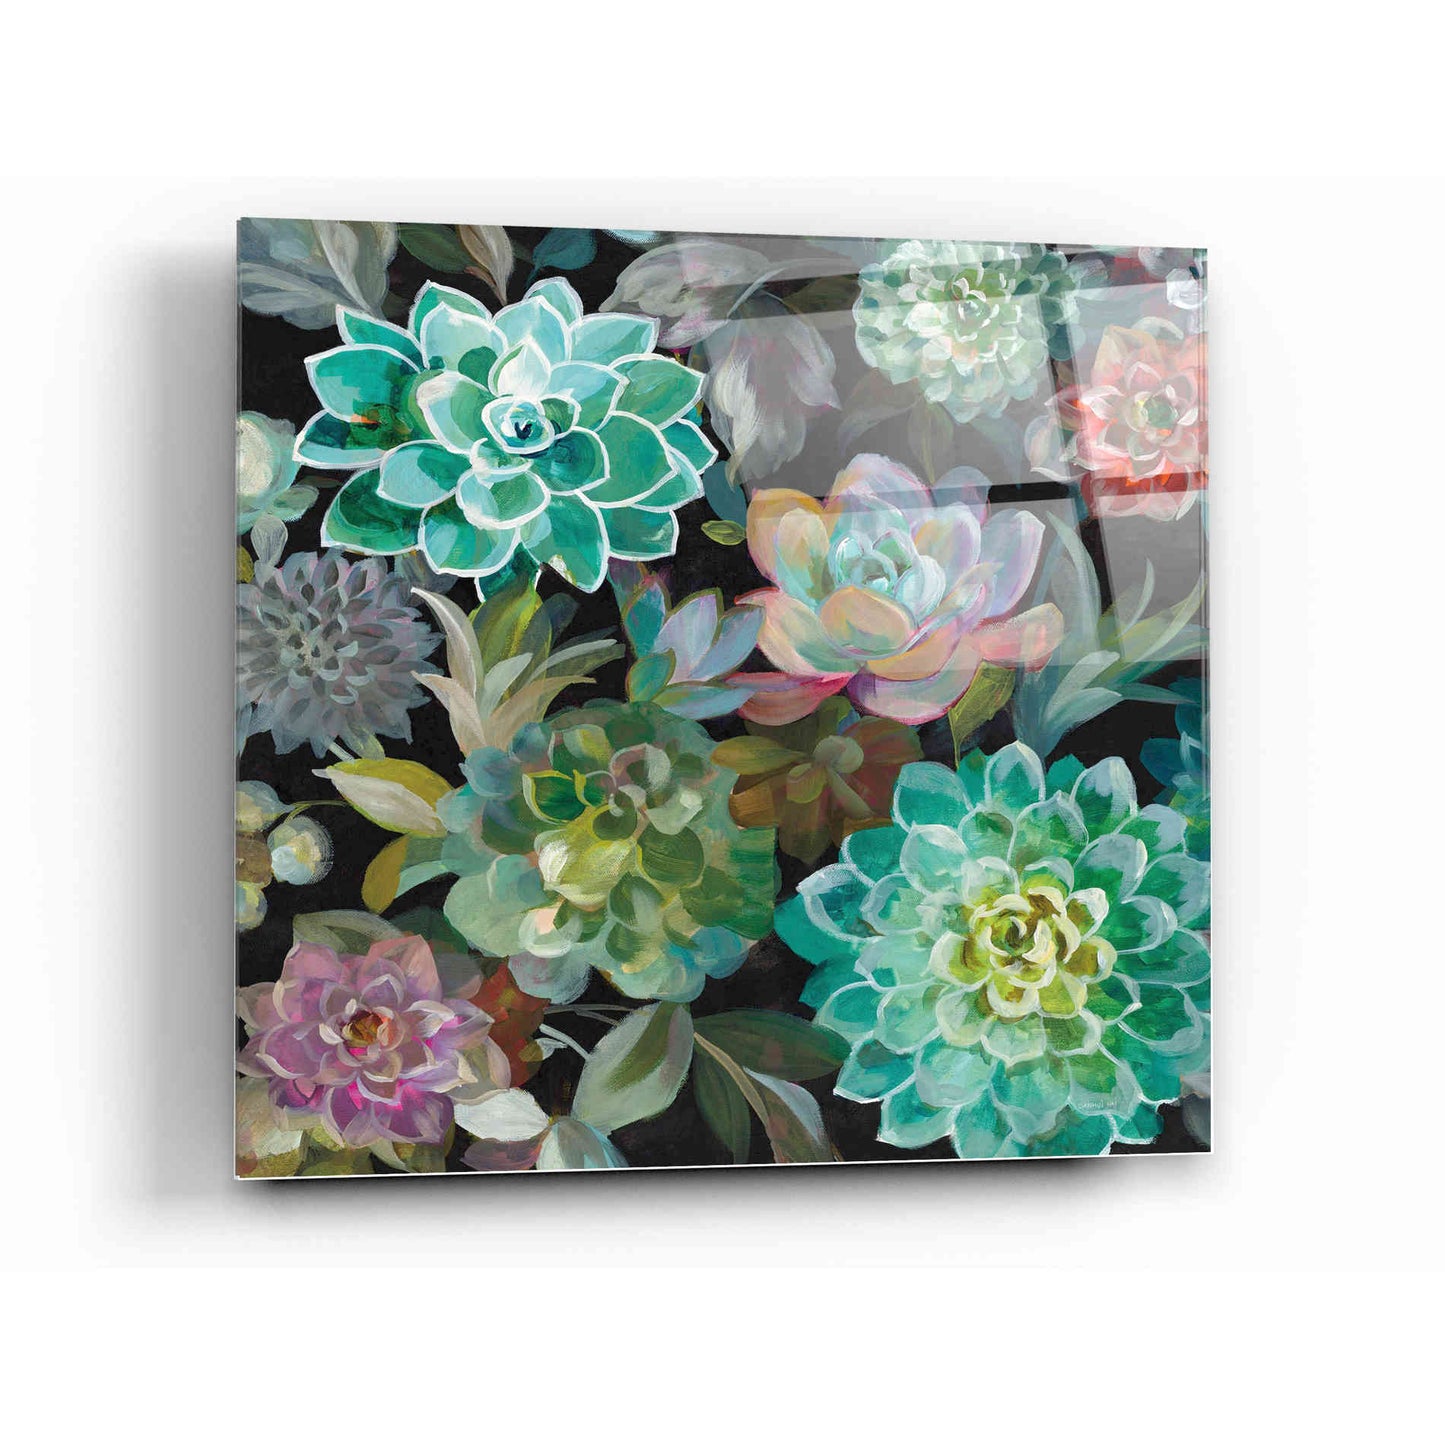 Epic Art 'Floral Succulents v2 Crop' by Danhui Nai, Acrylic Glass Wall Art,12 x 12